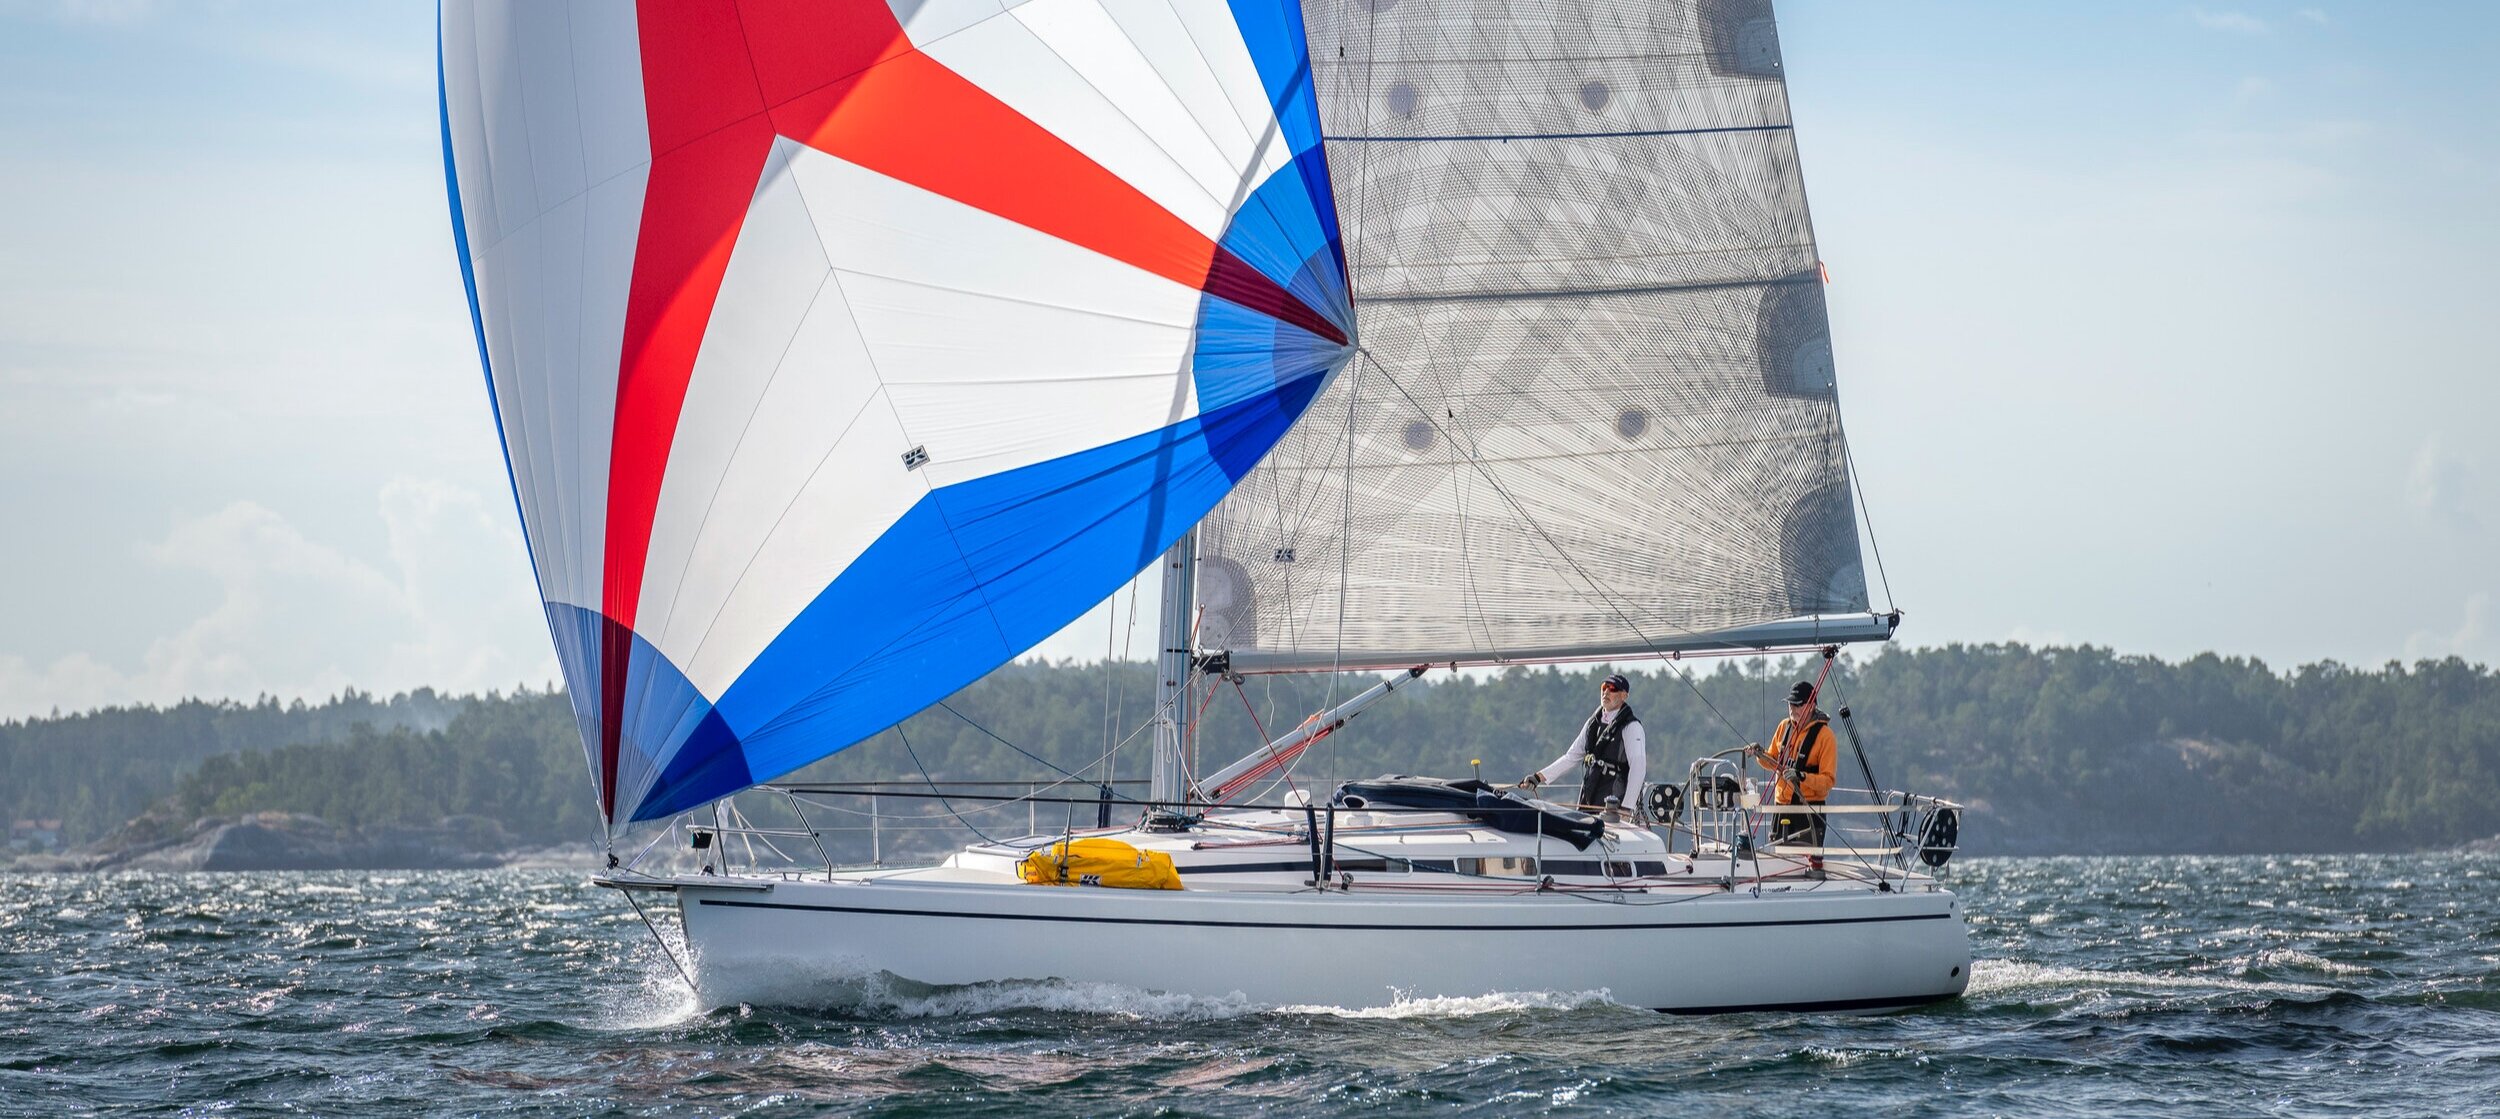 The immense popularity and exploding interest in big boat doublehanded sailing is branching out from its competitive roots in northern Europe to now engulfing nearly every corner of the sailing world. The trend is appears to be a sensible solution f…